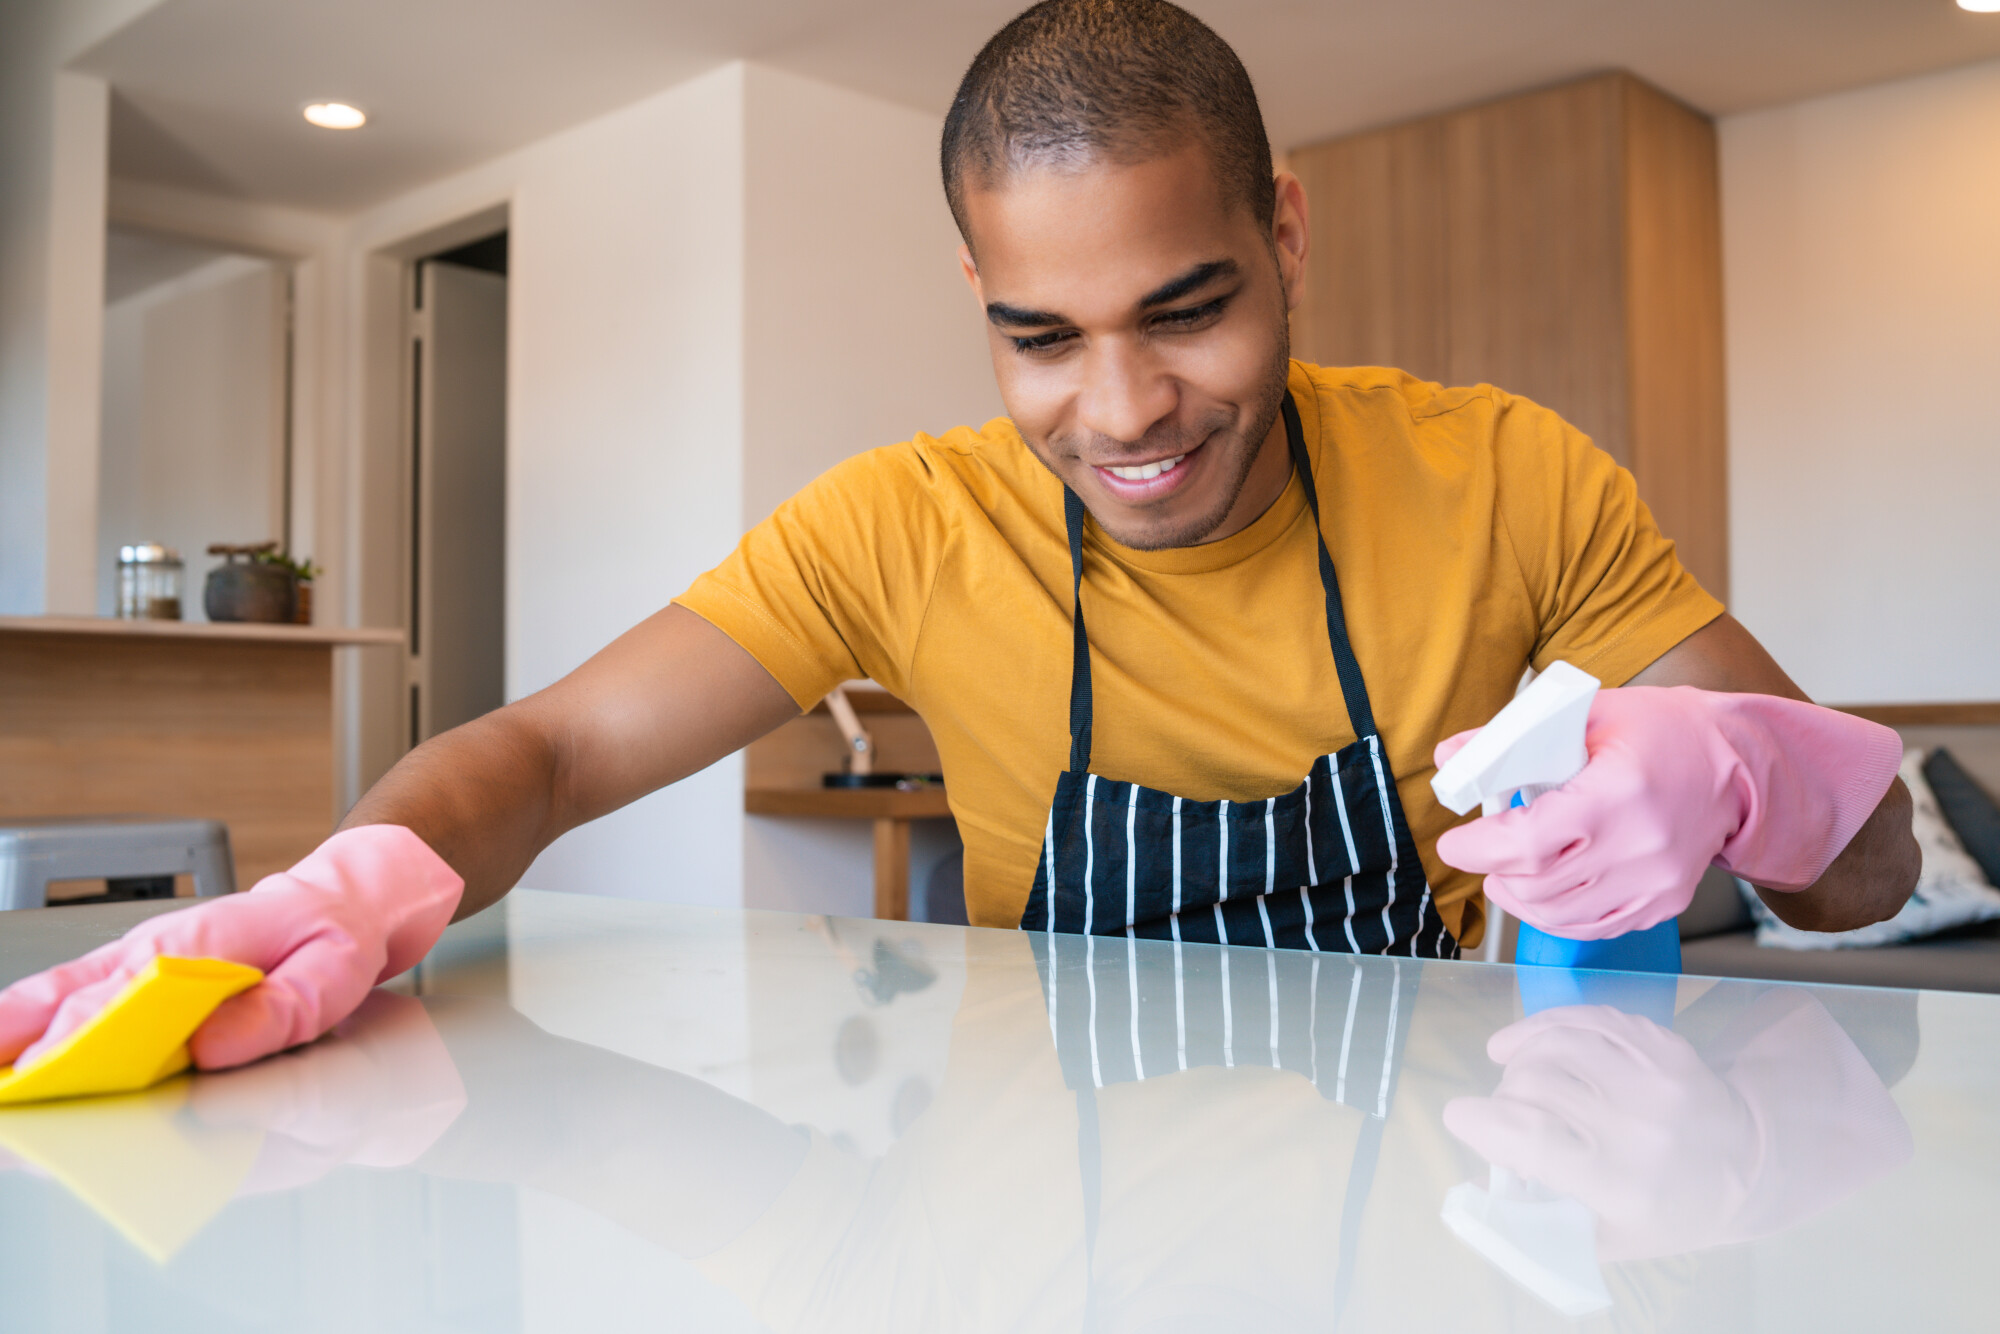 Cleaning Guide: How to Clean Your Home for a Party